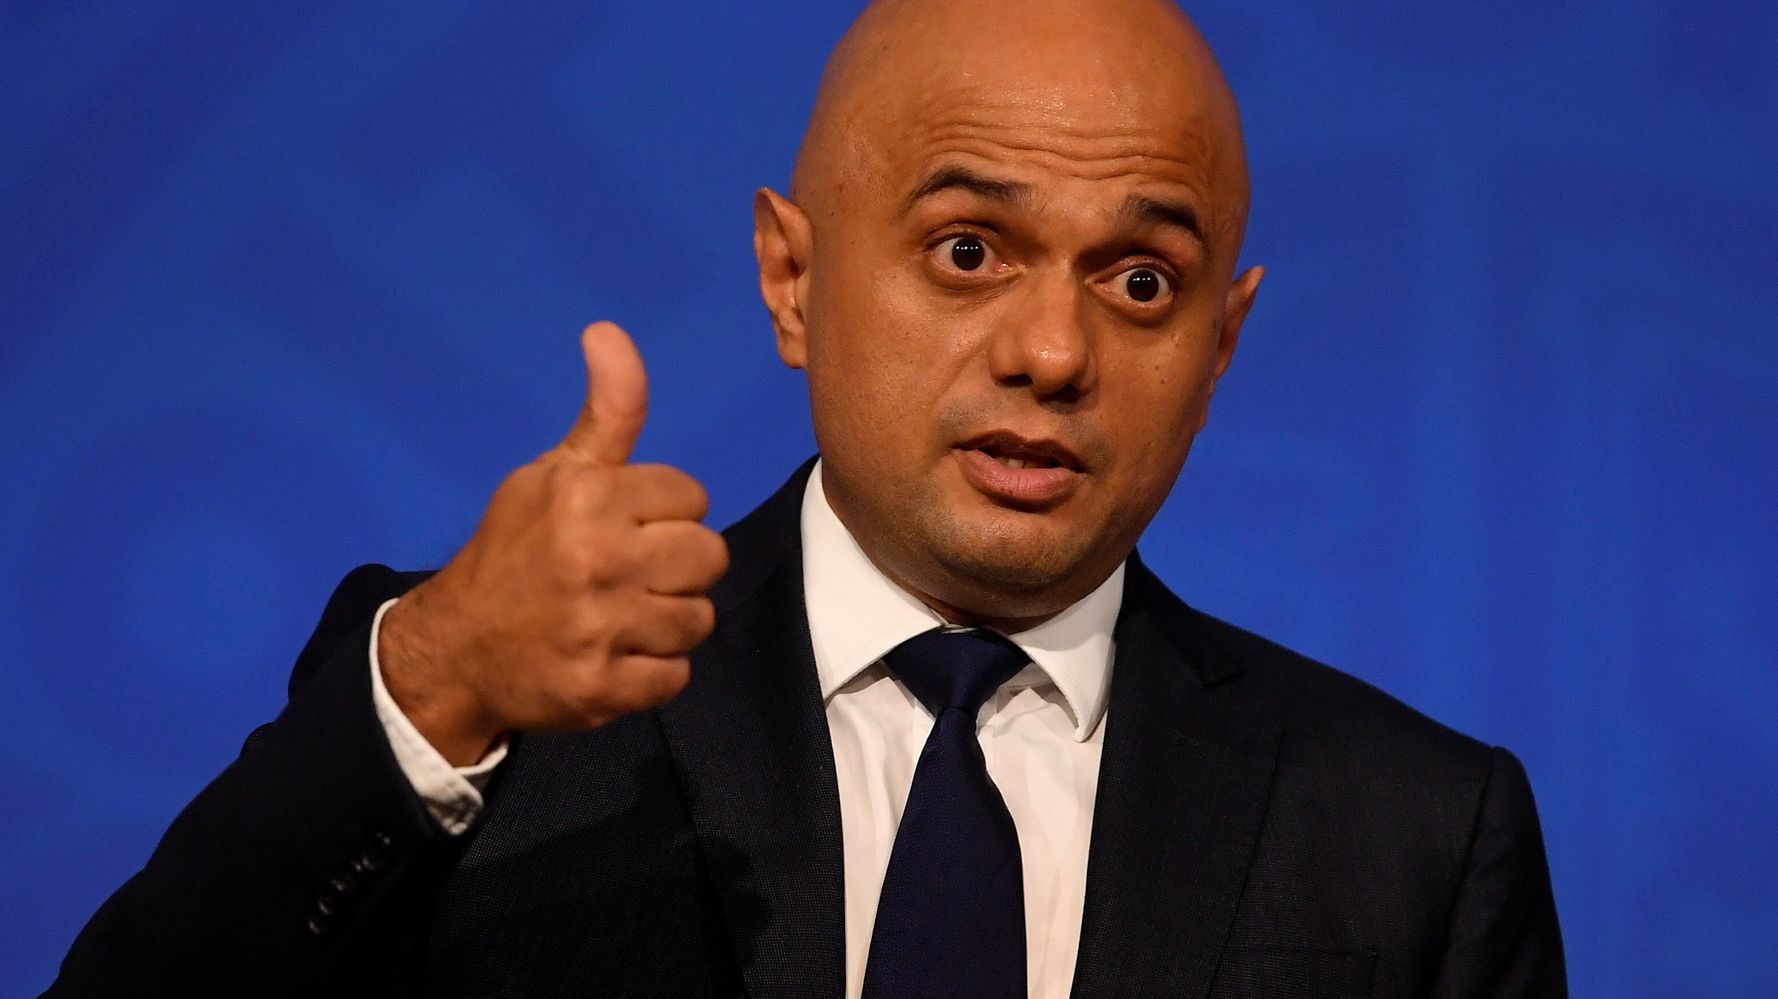 New Covid Variant Poses 'Substantial Risk' To Public Health, Says Sajid Javid